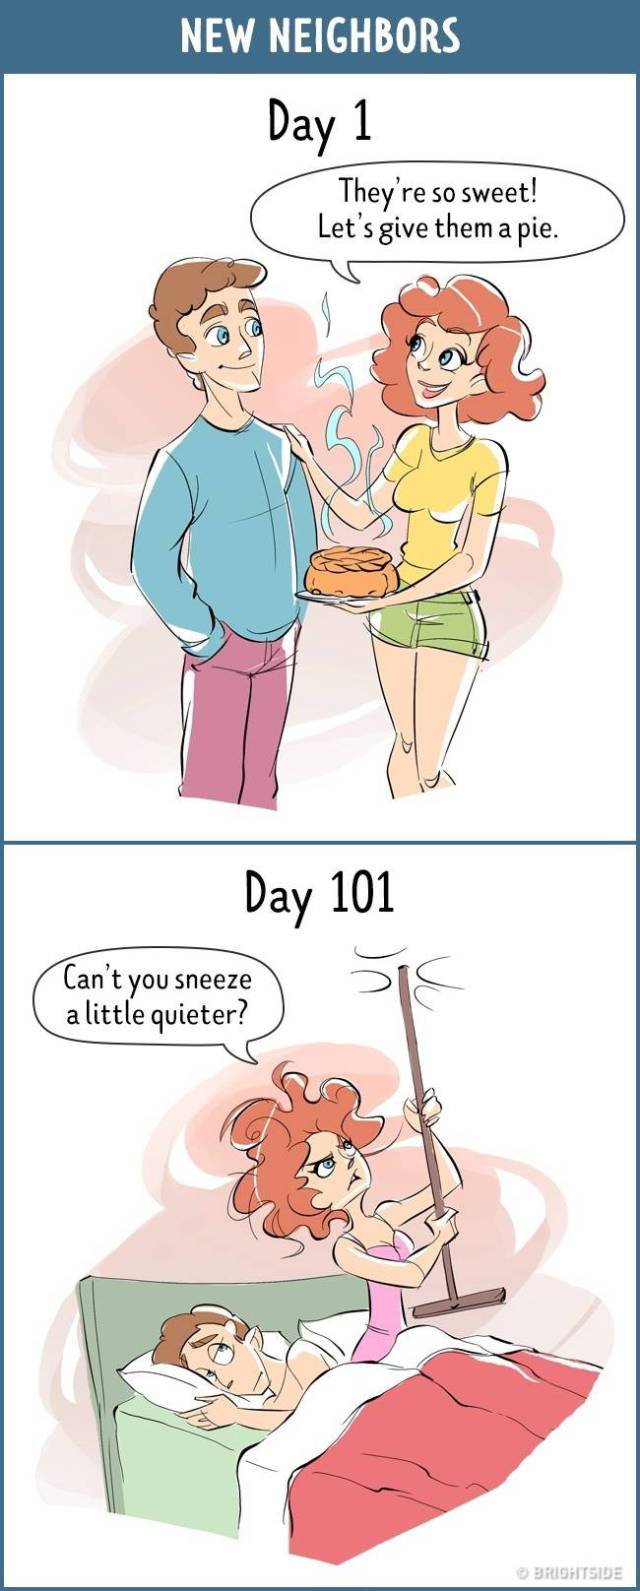 How We See Things On Day 1 And Day 101 Is Impressive And So True…